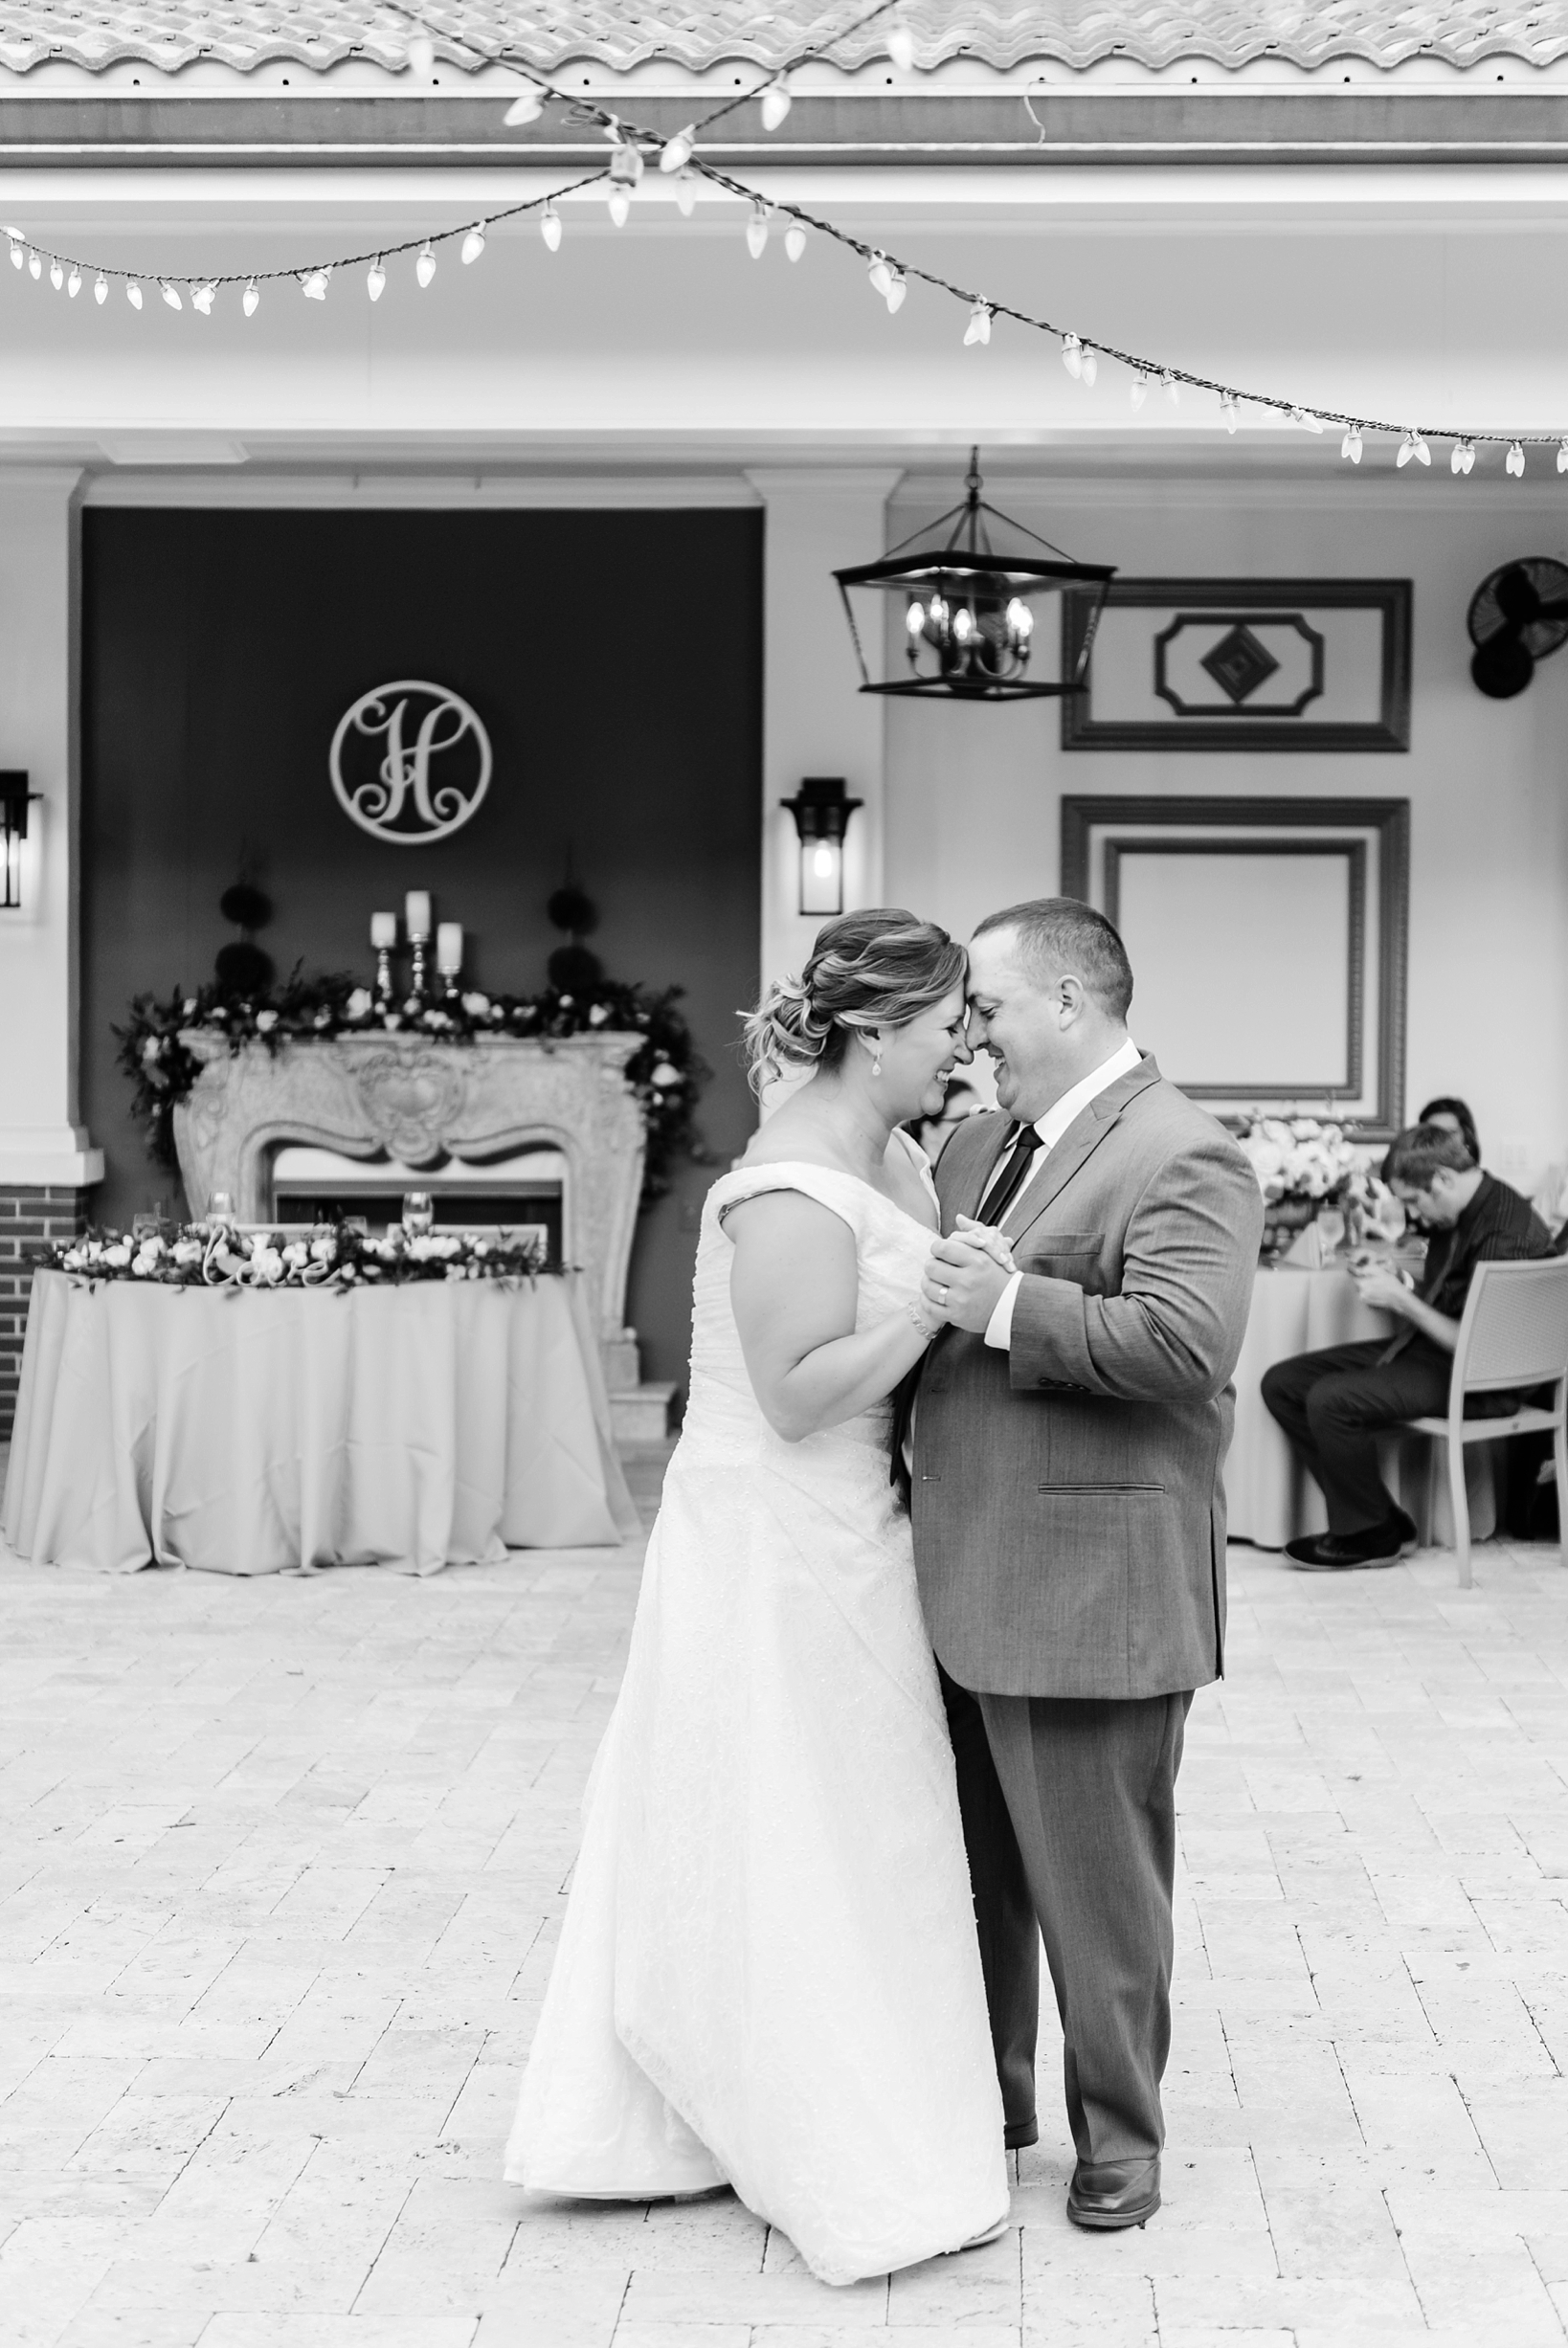 The couple share a smile during their first dance under the string lights